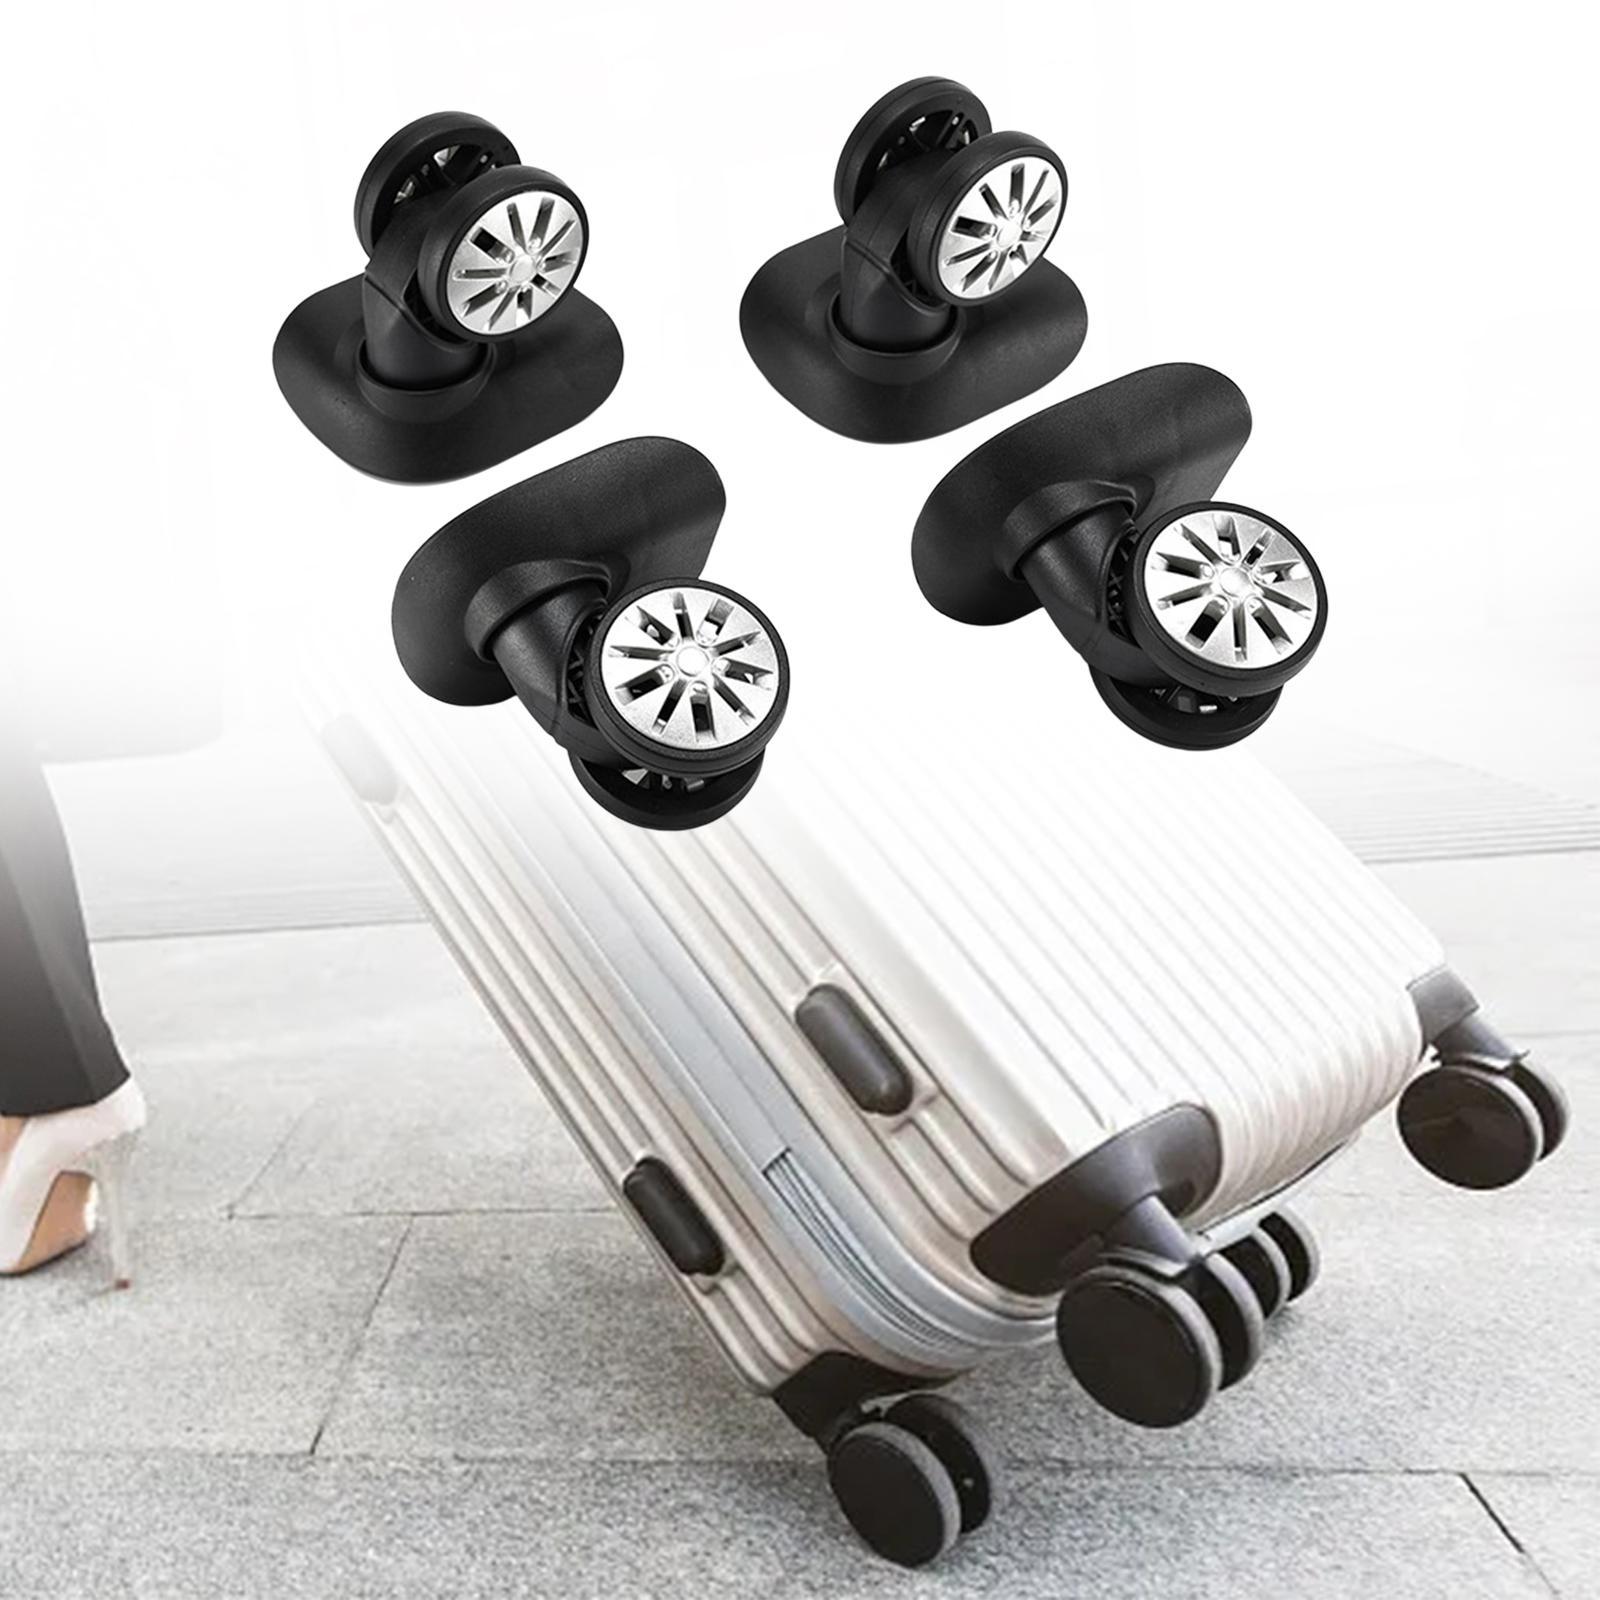 2x Replacement Luggage Wheels A19 Luggage Mute Wheel for